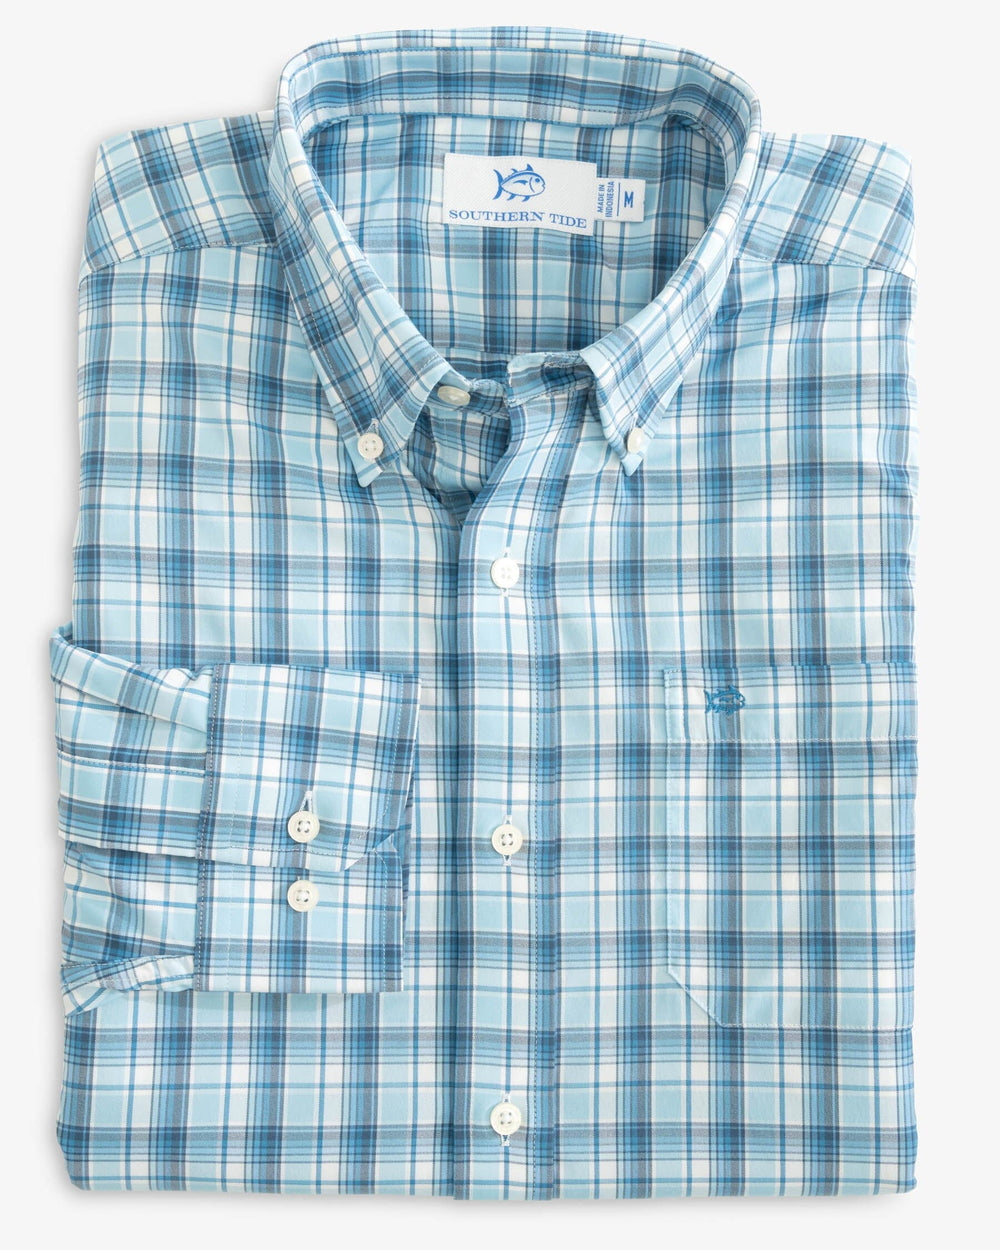 The folded view of the Southern Tide brrr Tidepointe Plaid Intercoastal Sport Shirt by Southern Tide - Rain Water